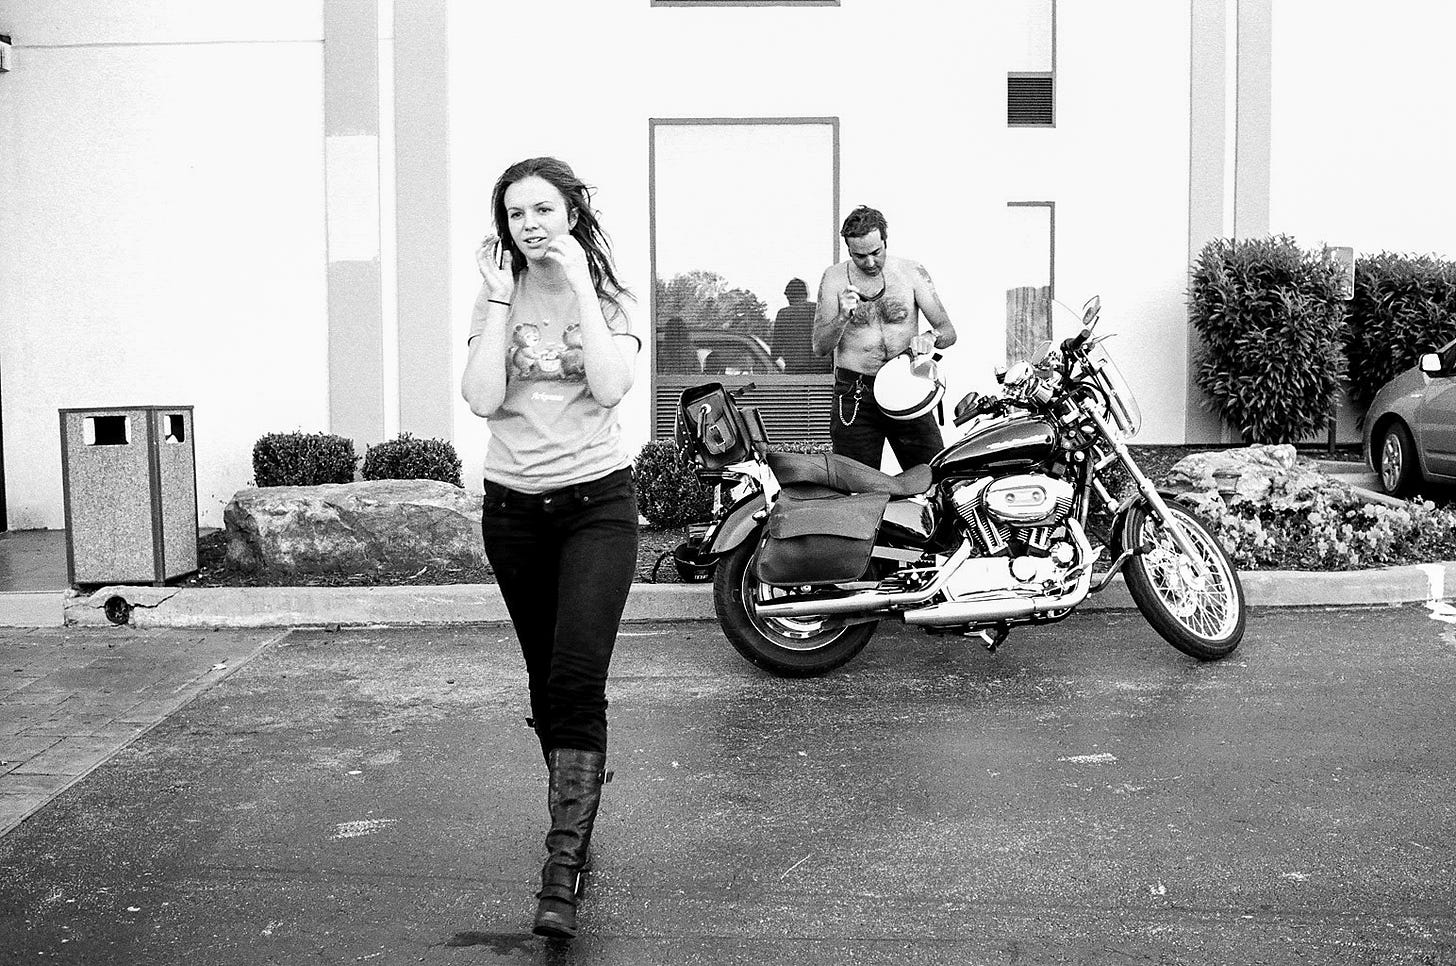 Derrick and Amber in a parking lot. Derrick is standing next to the parked motorcycle with his helmet in his hand. Amber is walking toward the camera as if she's going to pass by it. Her hands are near her face like she's about to adjust her hair from wearing her motorcycle helmet. 